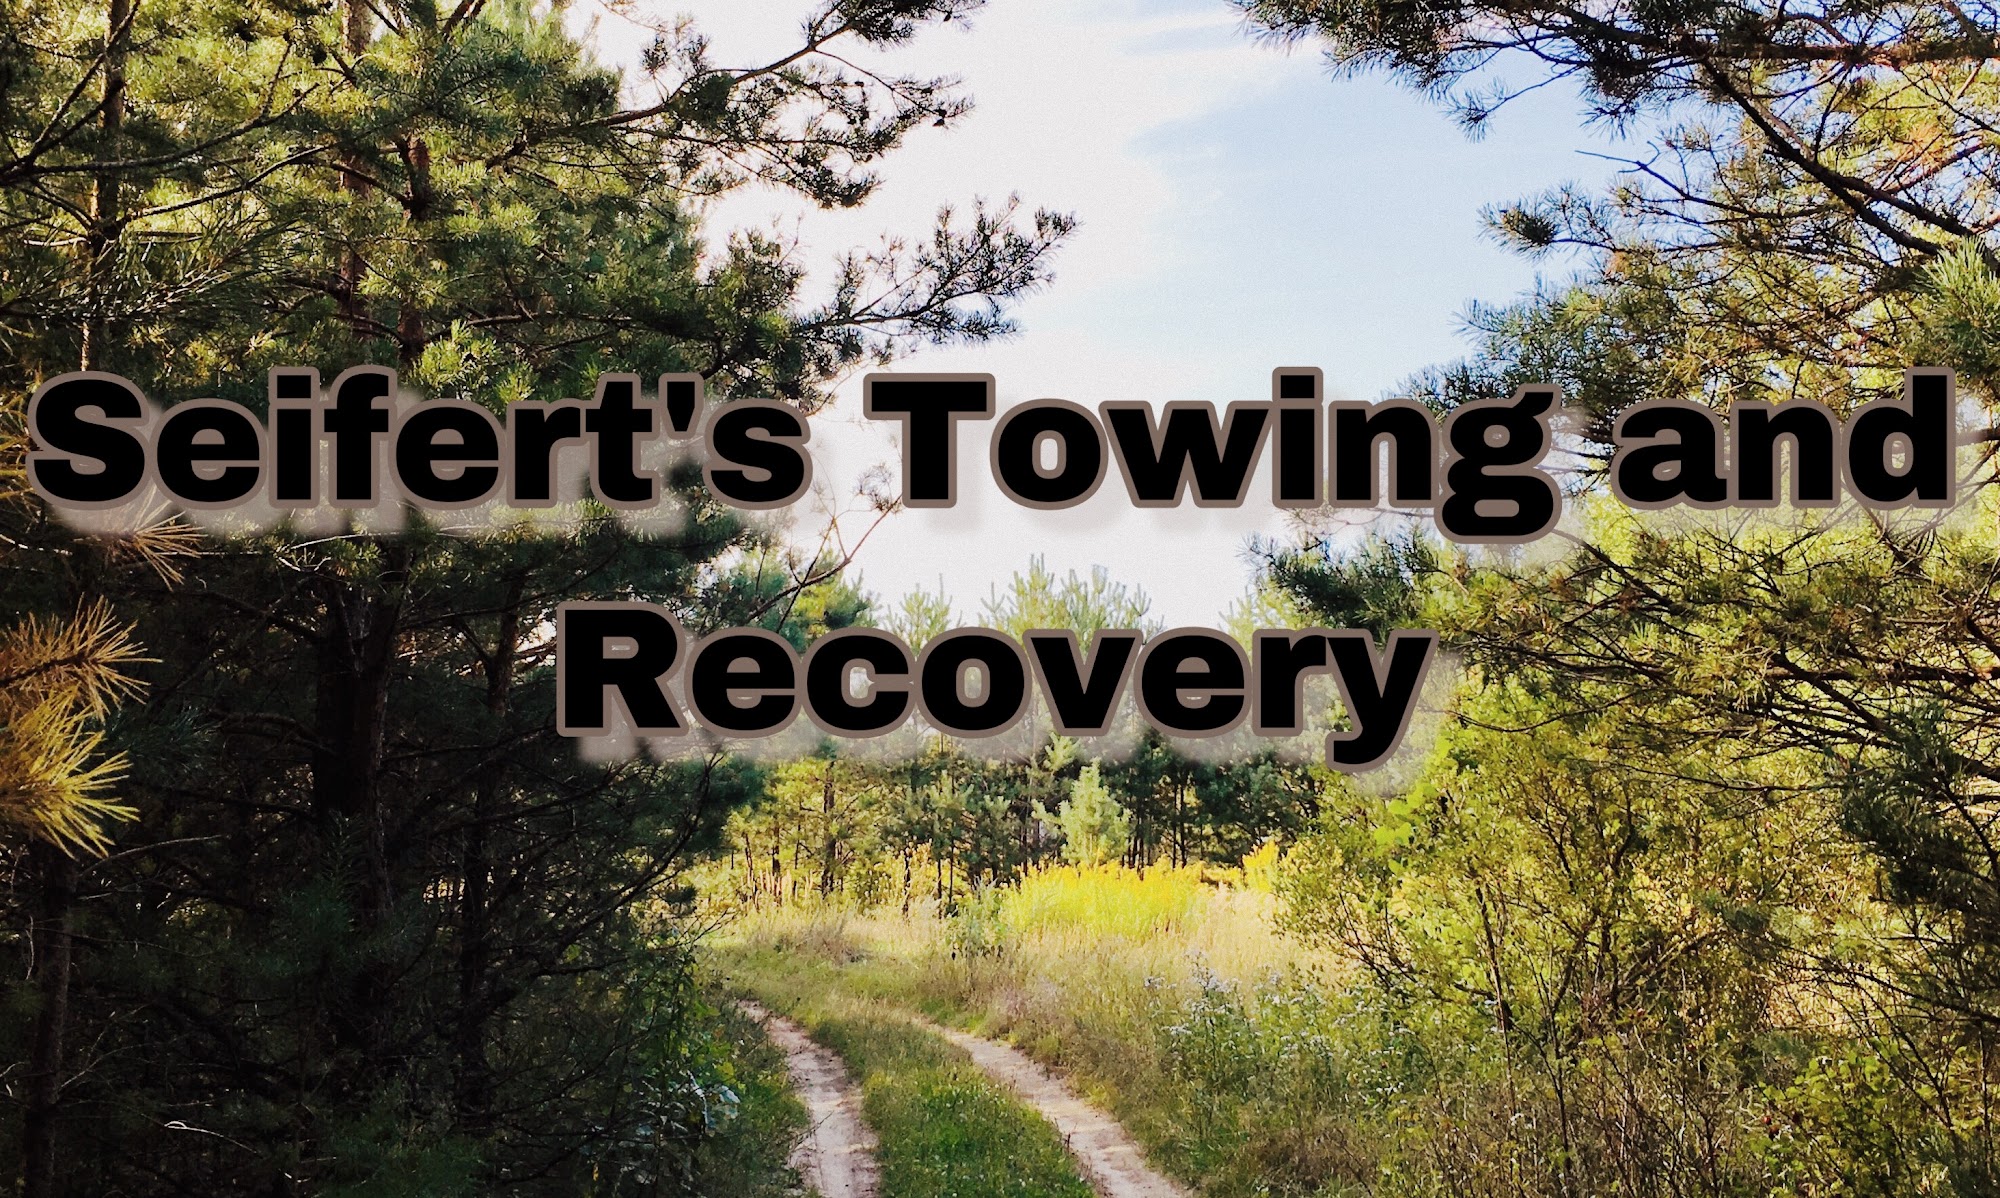 Seifert’s Towing and Recovery